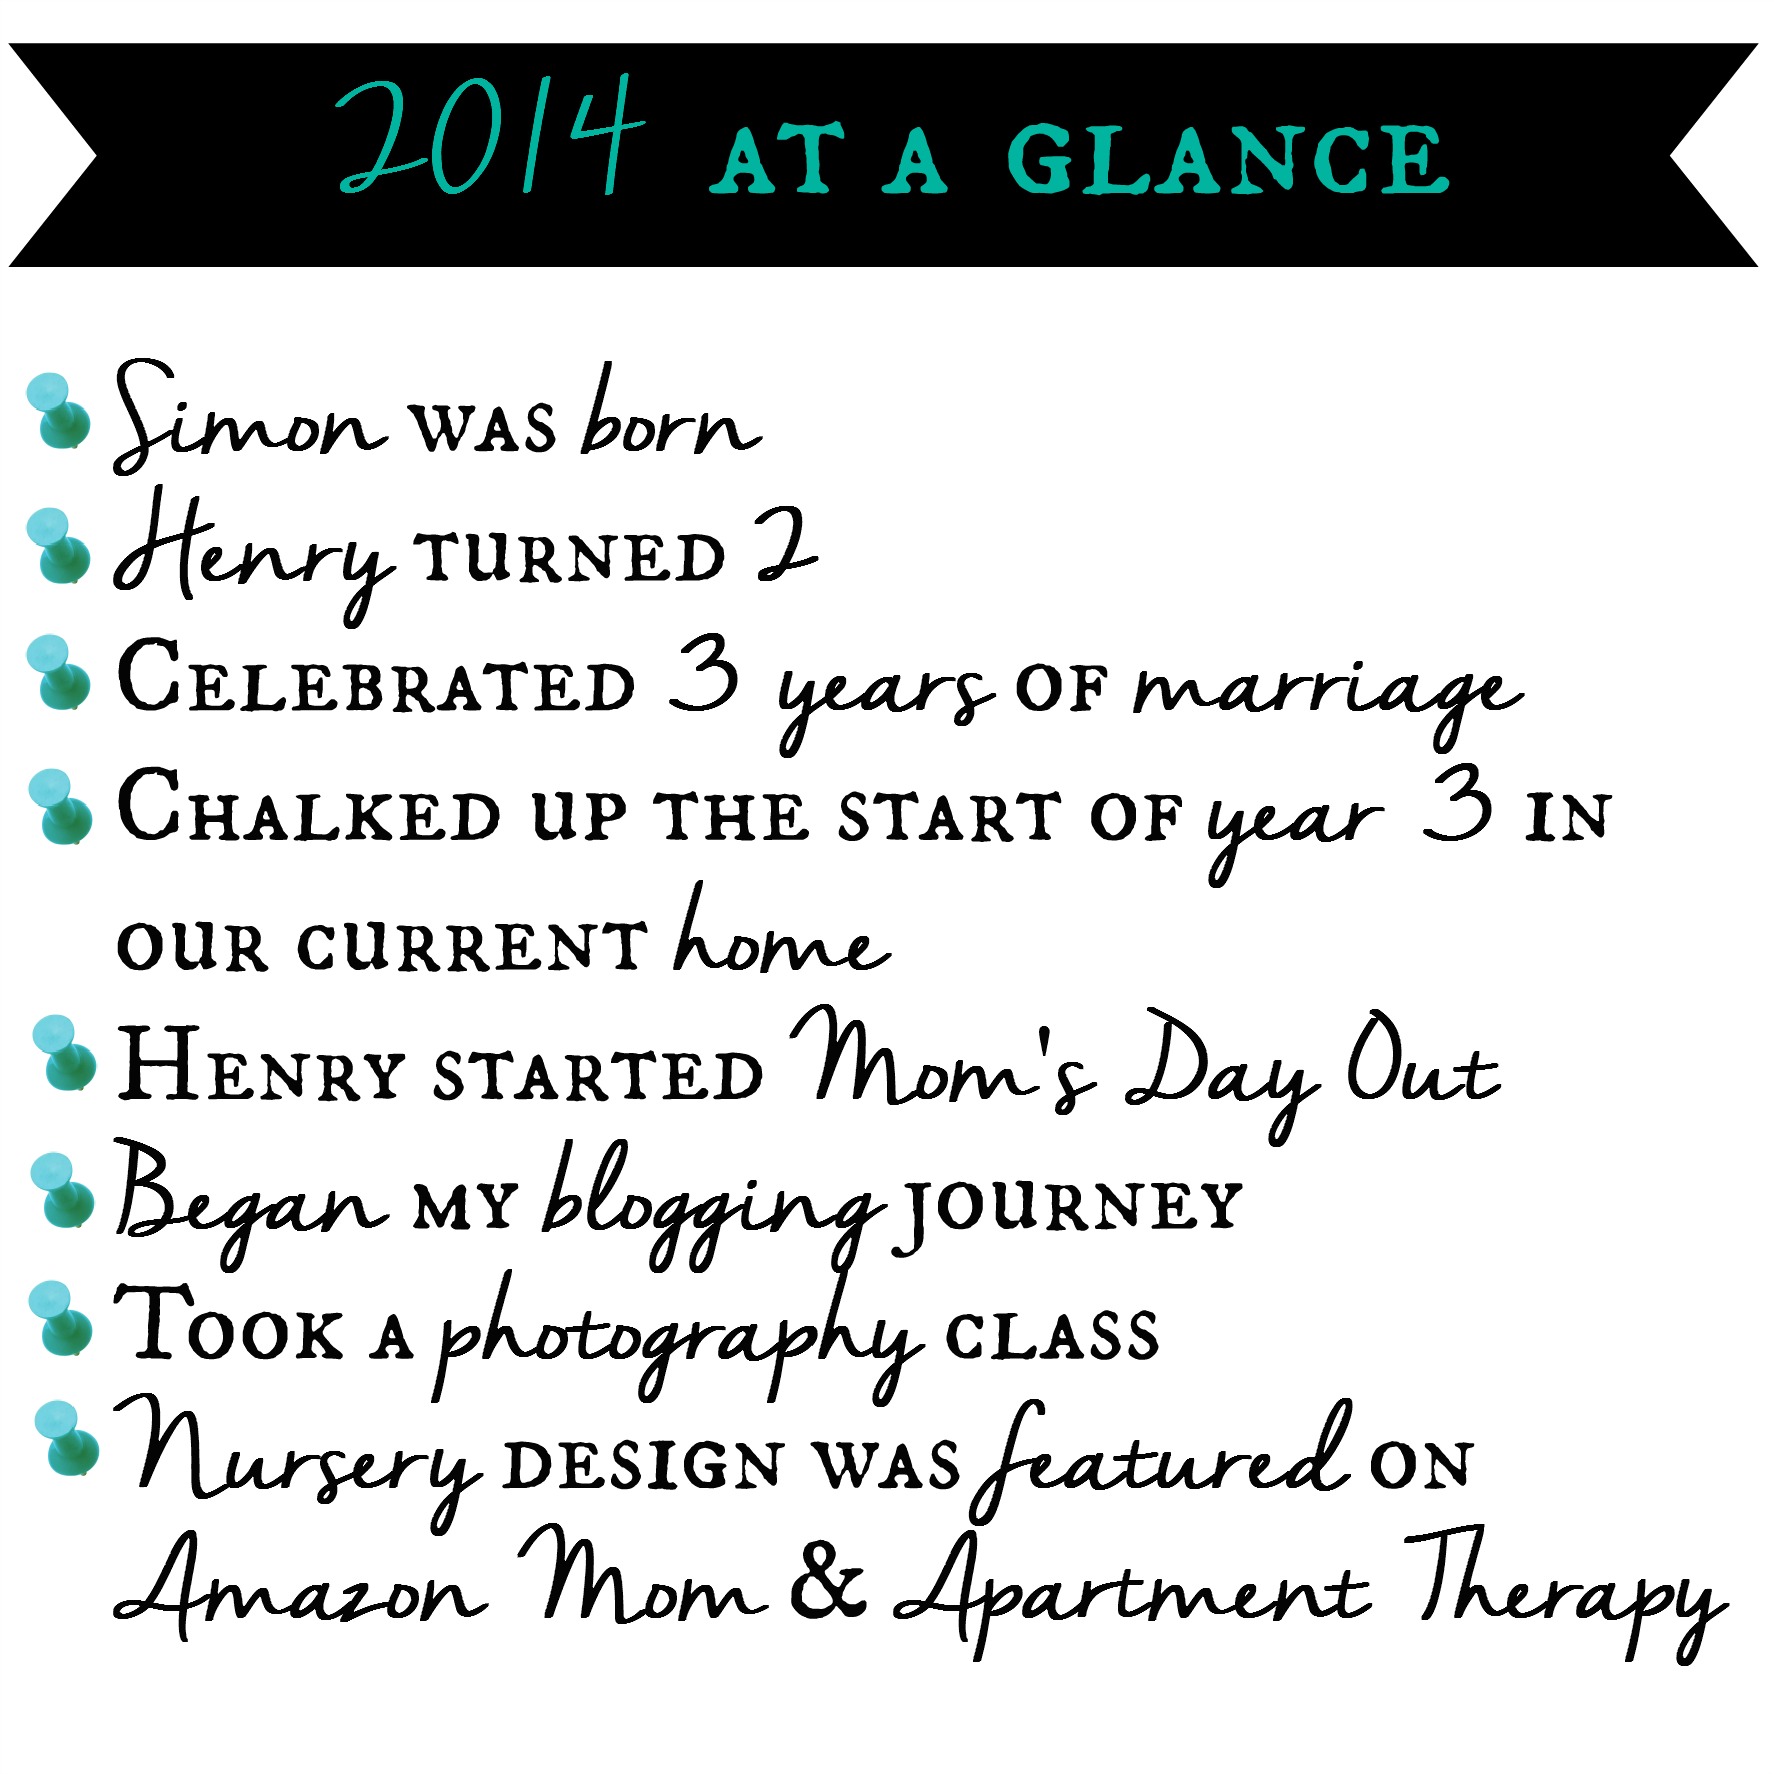 2014 at a Glance - 2014 highlights - 2014 year in review